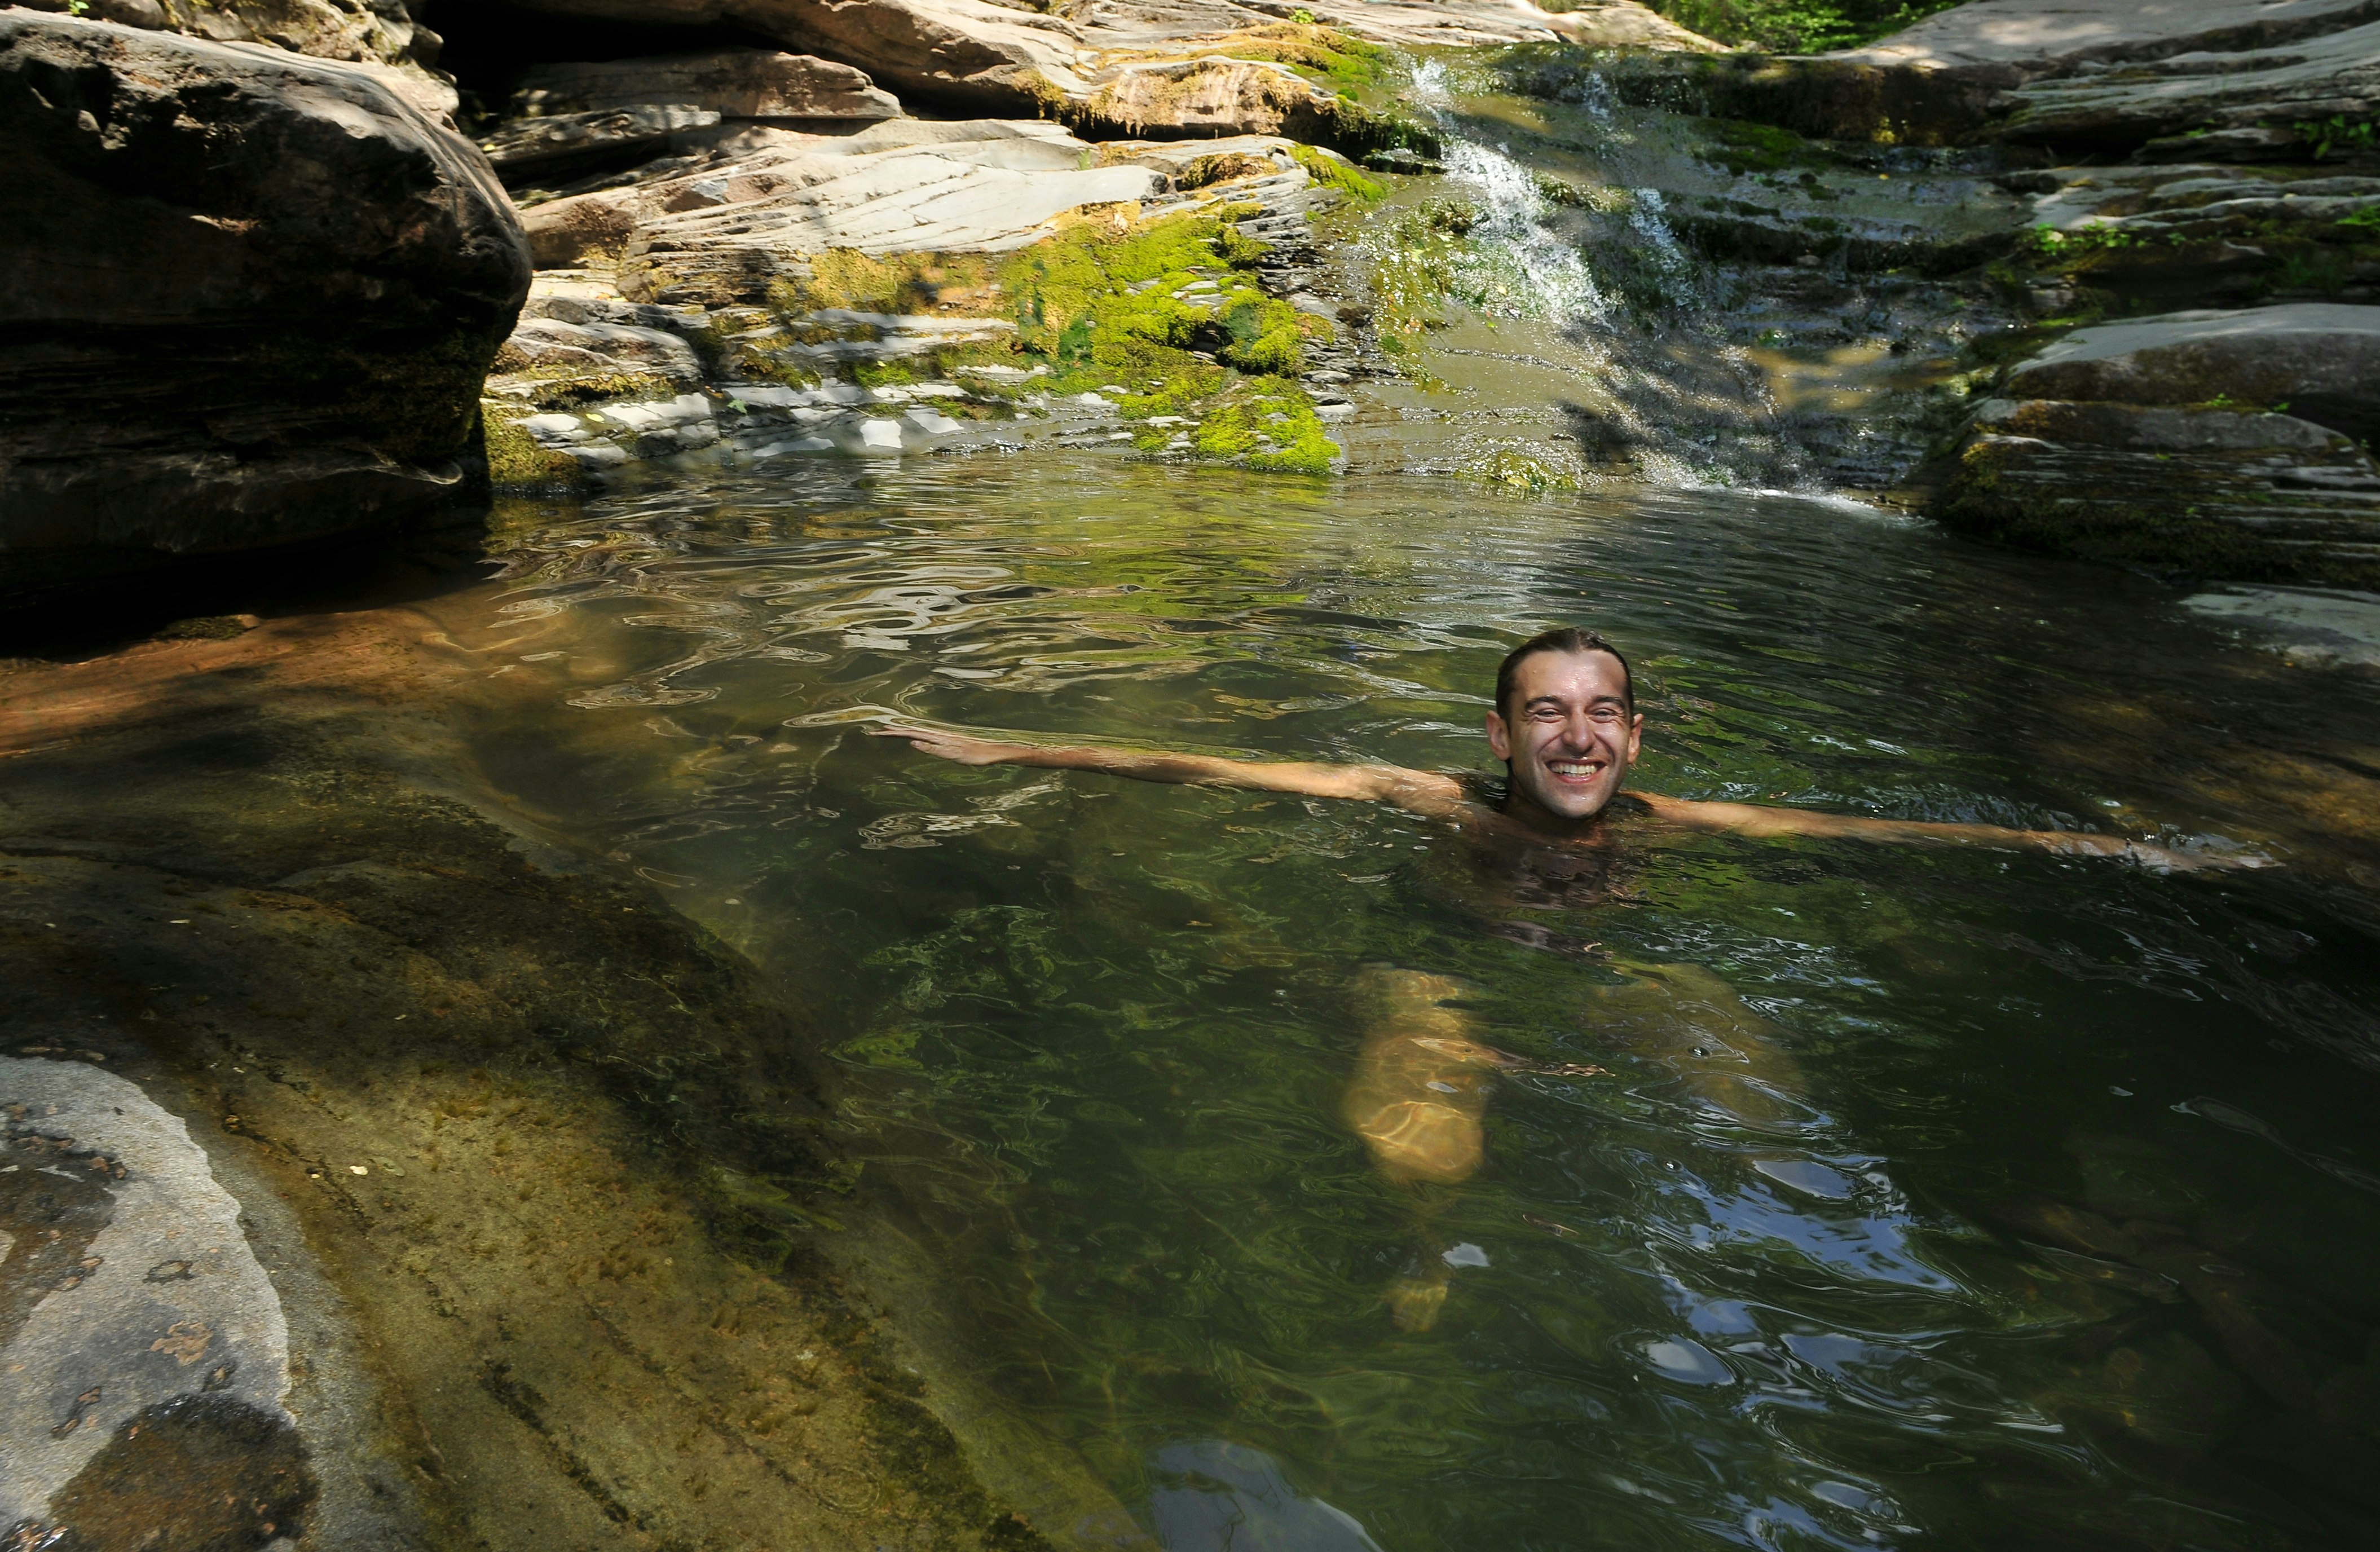 A man swimming in an oasis pool with waterfall at Catskills mountains, NY